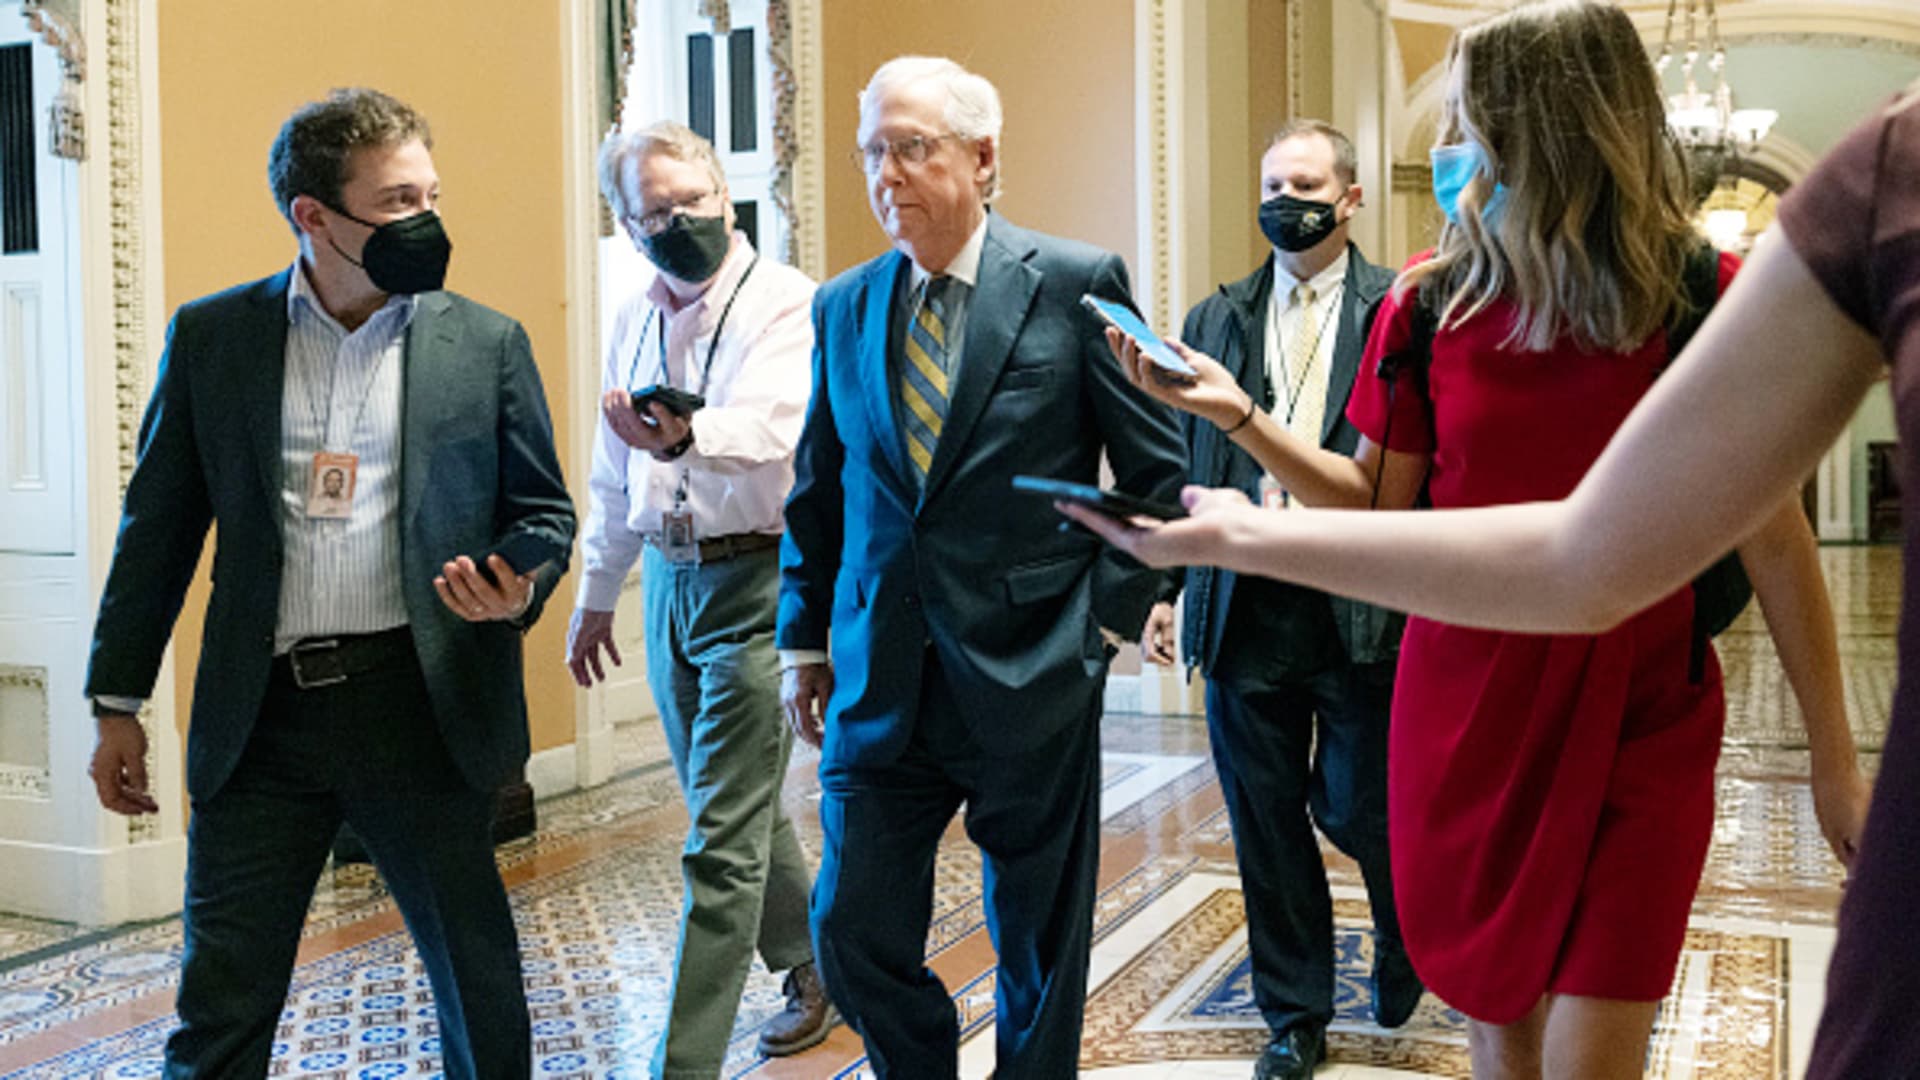 Senate Minority Leader Mitch McConnell (R-KY) walks to his office at the U.S. Capitol on October 06, 2021 in Washington, DC.